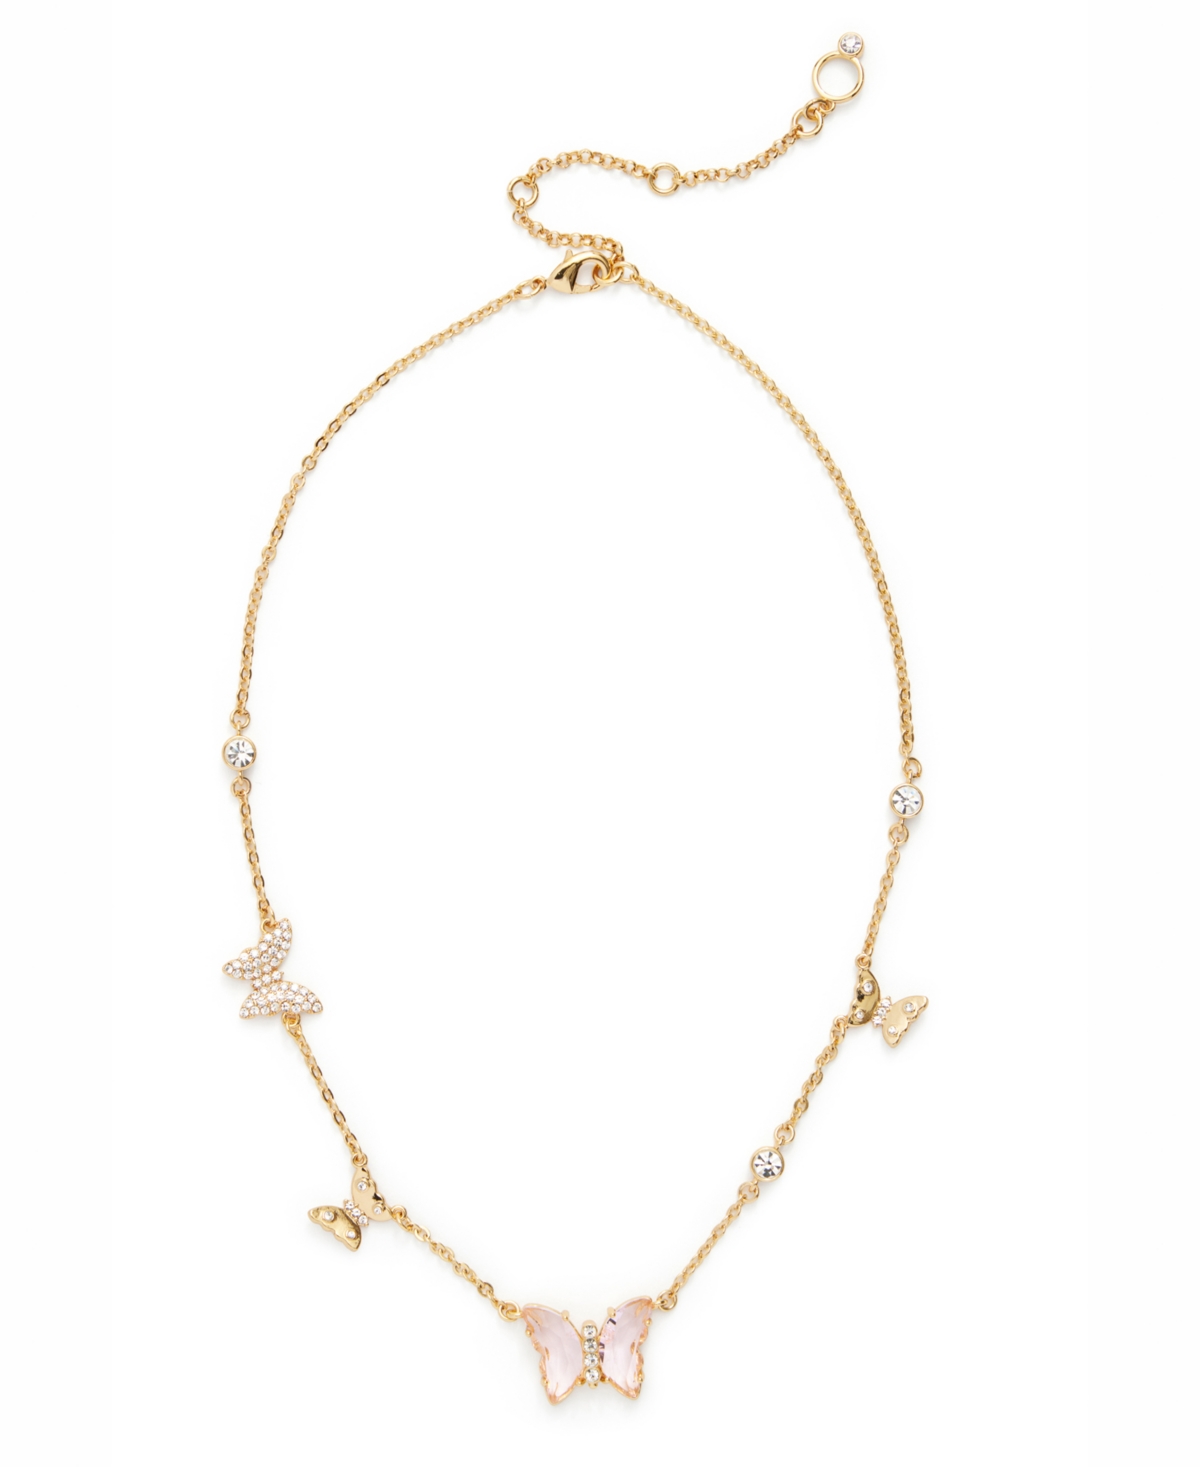 Faux Stone Mixed Butterfly Bib Necklace - Pink, Gold